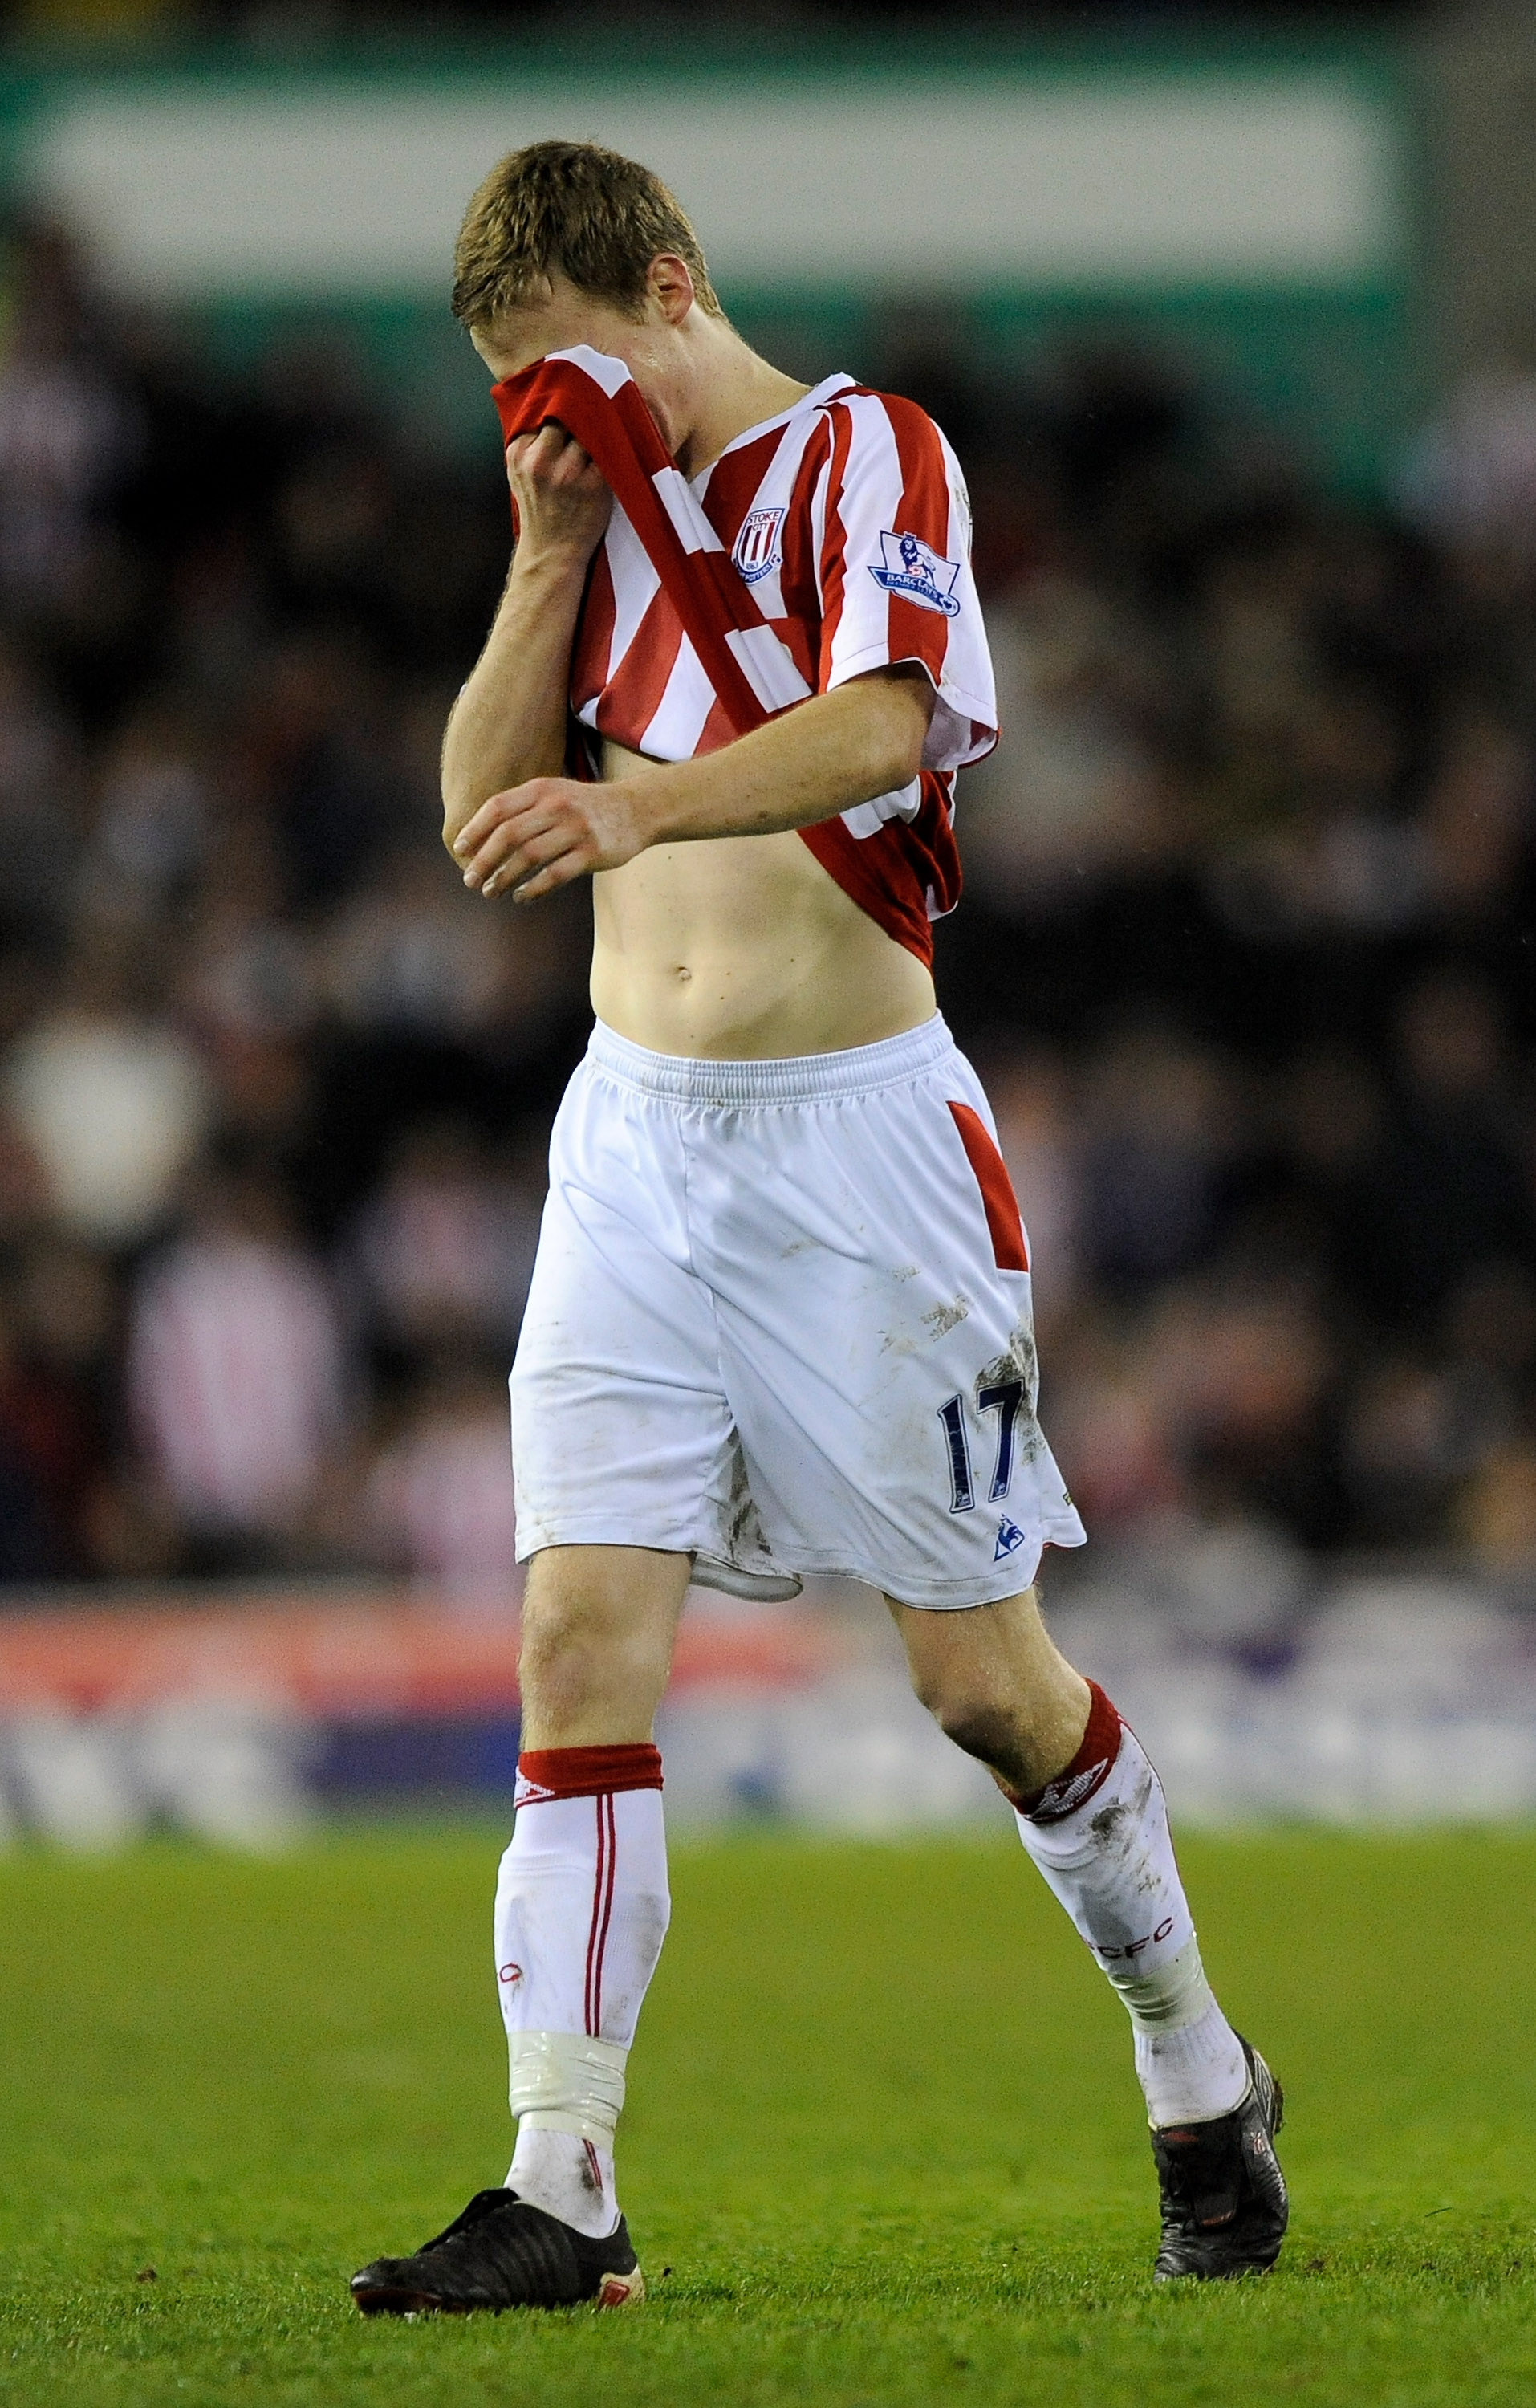 STOKE ON TRENT, ENGLAND - FEBRUARY 27:  Ryan Shawcross of Stoke City leaves the pitch in tears after being sent off for a challenge on Aaron Ramsey of Arsenal during the Barclays Premier League match between Stoke City and Arsenal at The Britannia Stadium